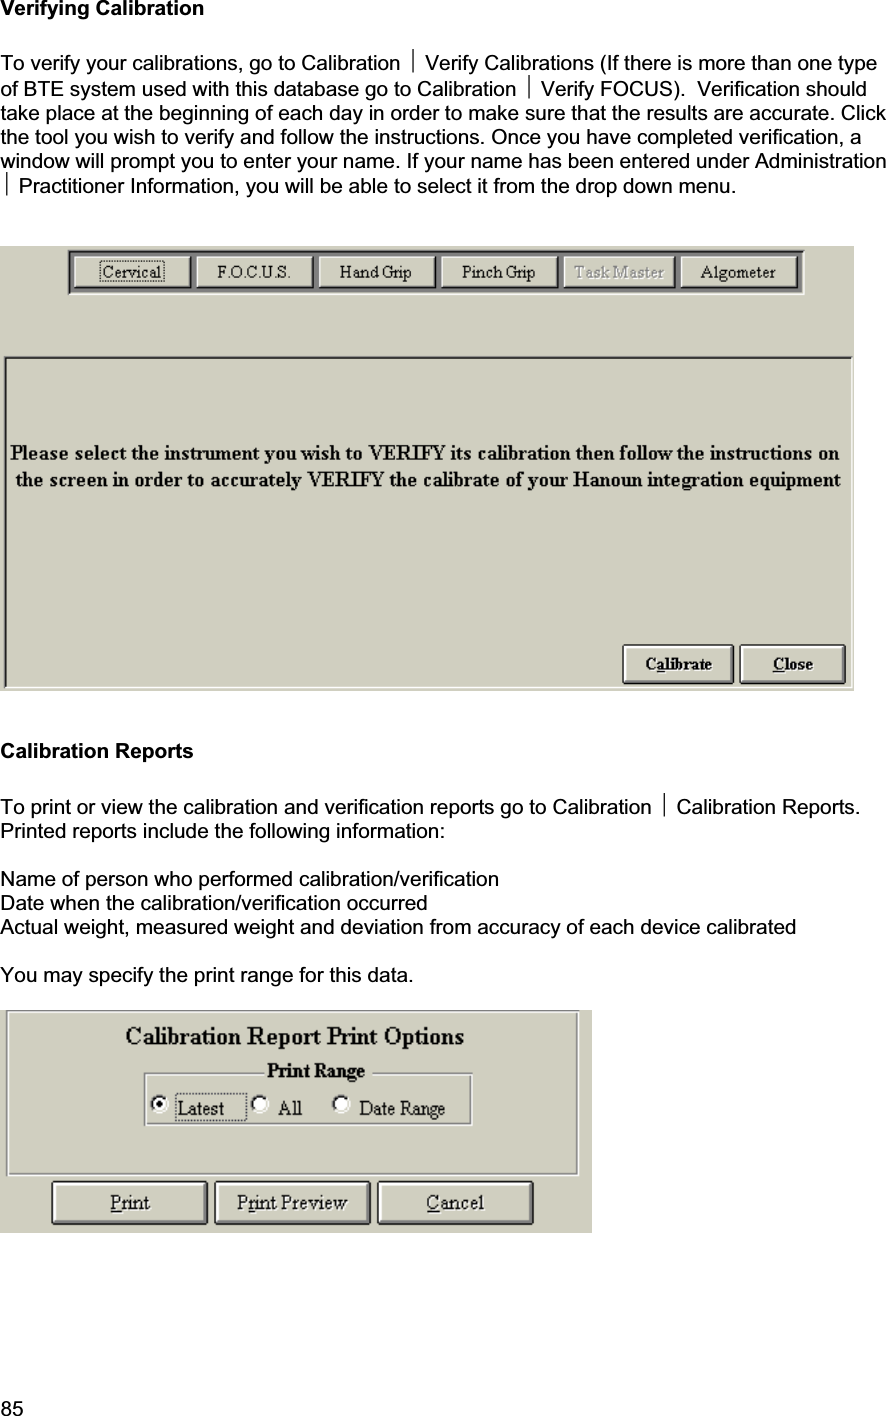 85     Verifying Calibration To verify your calibrations, go to Calibration ~ Verify Calibrations (If there is more than one type of BTE system used with this database go to Calibration ~ Verify FOCUS).  Verification should take place at the beginning of each day in order to make sure that the results are accurate. Click the tool you wish to verify and follow the instructions. Once you have completed verification, a window will prompt you to enter your name. If your name has been entered under Administration ~ Practitioner Information, you will be able to select it from the drop down menu.  Calibration Reports To print or view the calibration and verification reports go to Calibration ~ Calibration Reports. Printed reports include the following information: Name of person who performed calibration/verification Date when the calibration/verification occurred Actual weight, measured weight and deviation from accuracy of each device calibrated You may specify the print range for this data. 